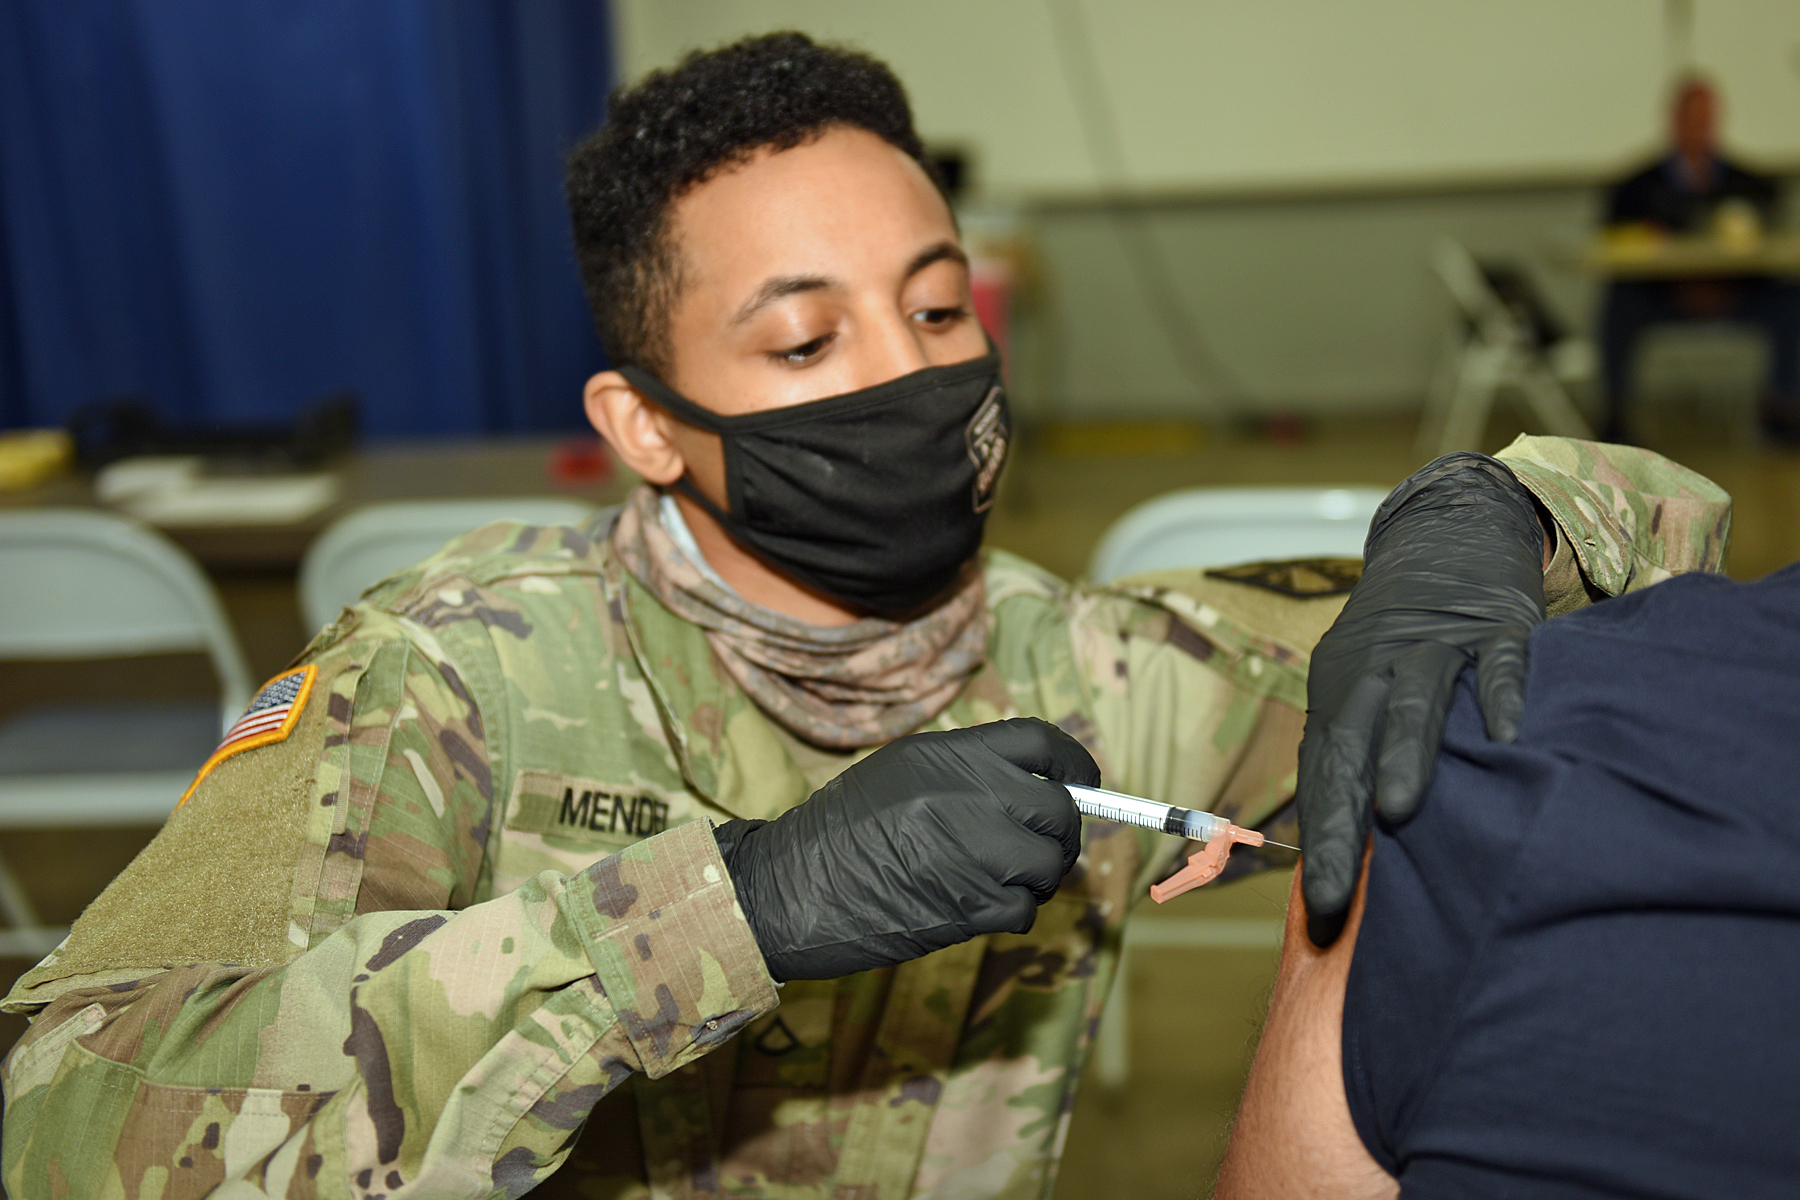 Ming Assists Large-scale Vaccination Clinic At Fairgrounds National Guard Guard News - The National Guard